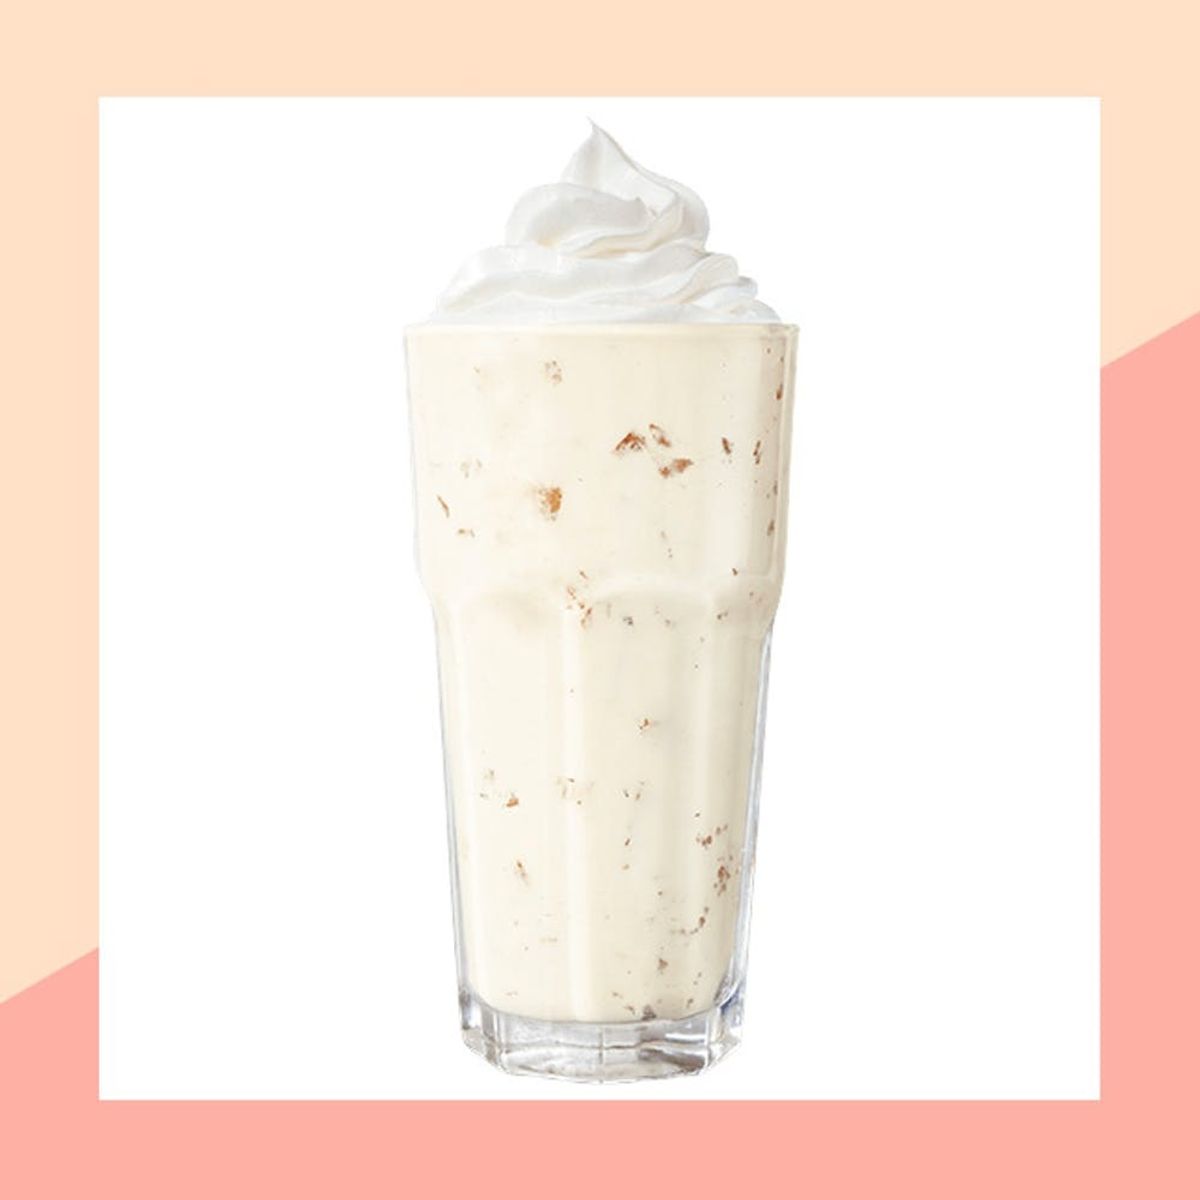 Cinnamon Toast Crunch Milkshakes Exist, and You Can Get Them at Burger King